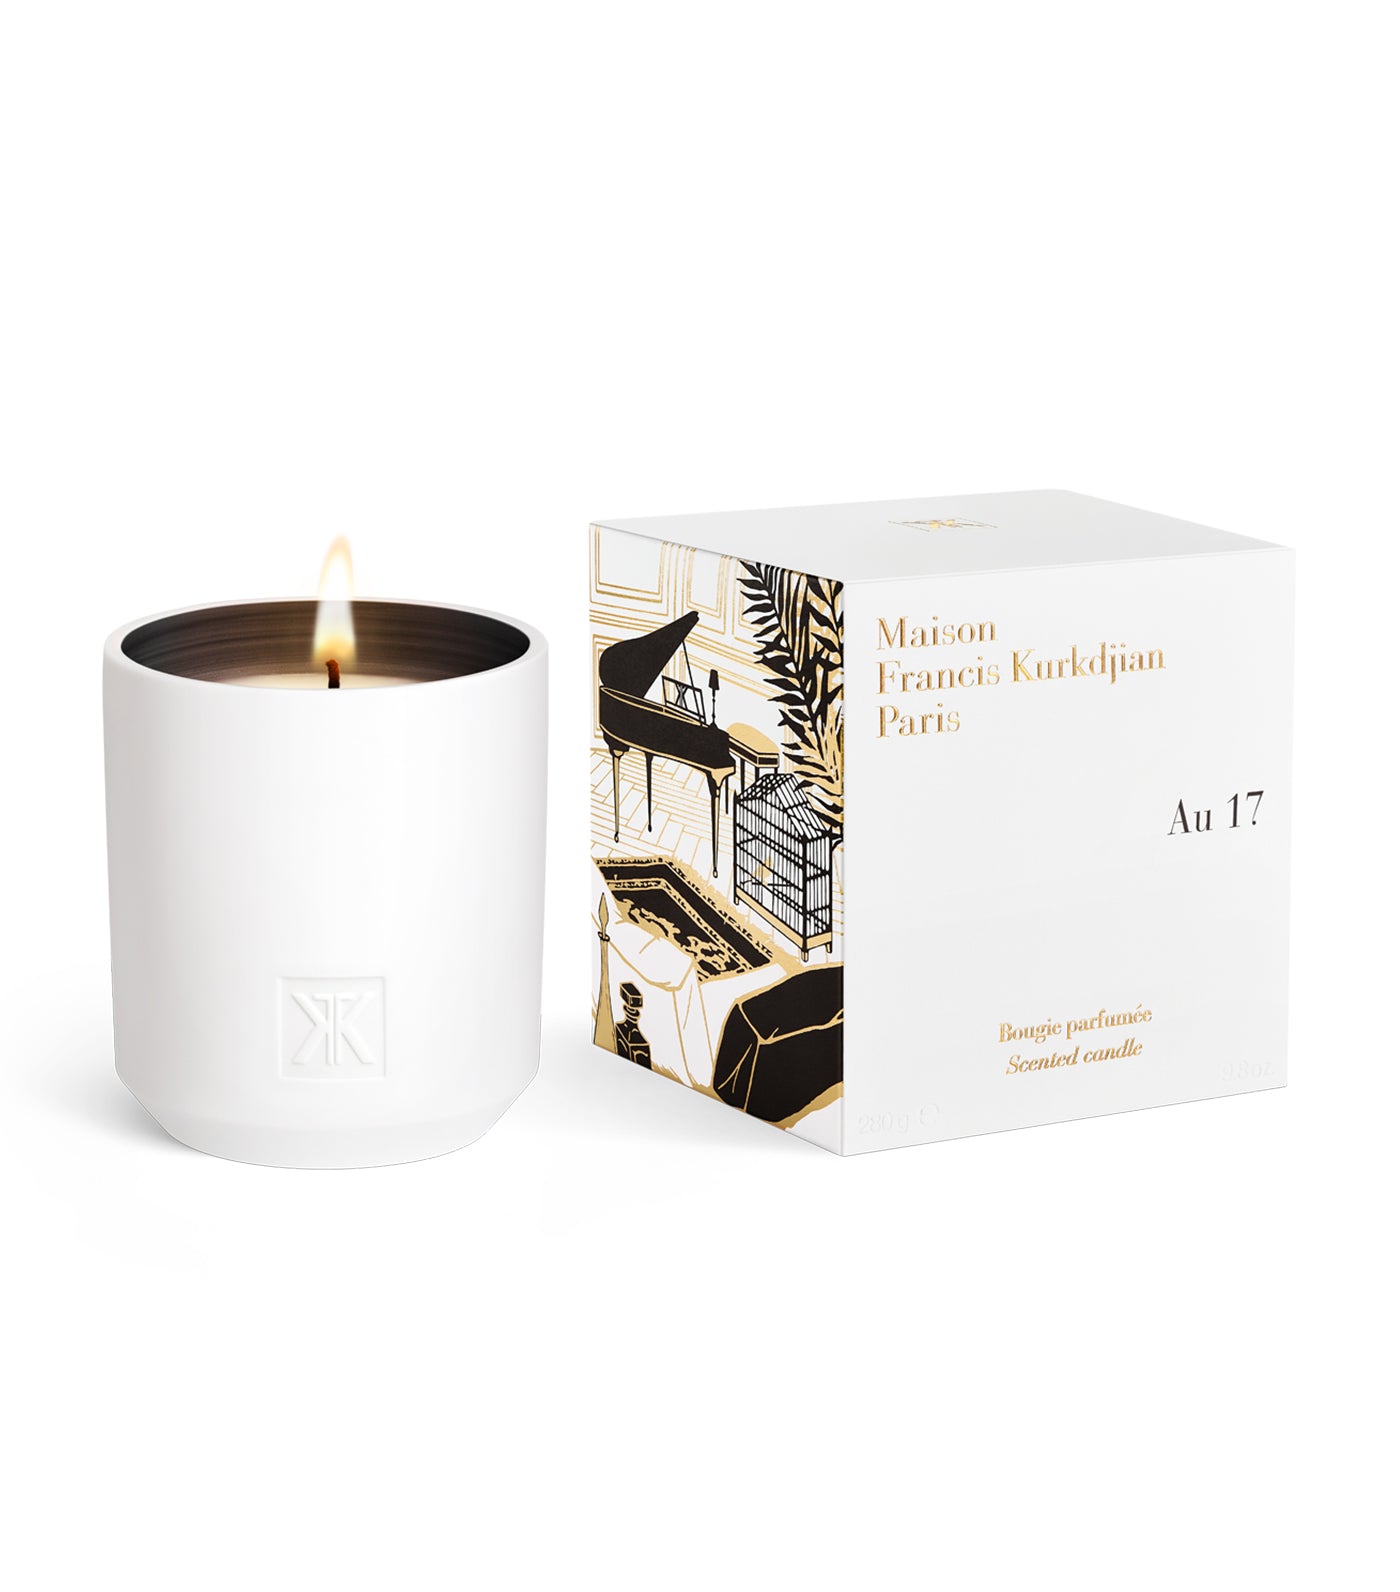 Au 17 scented candle